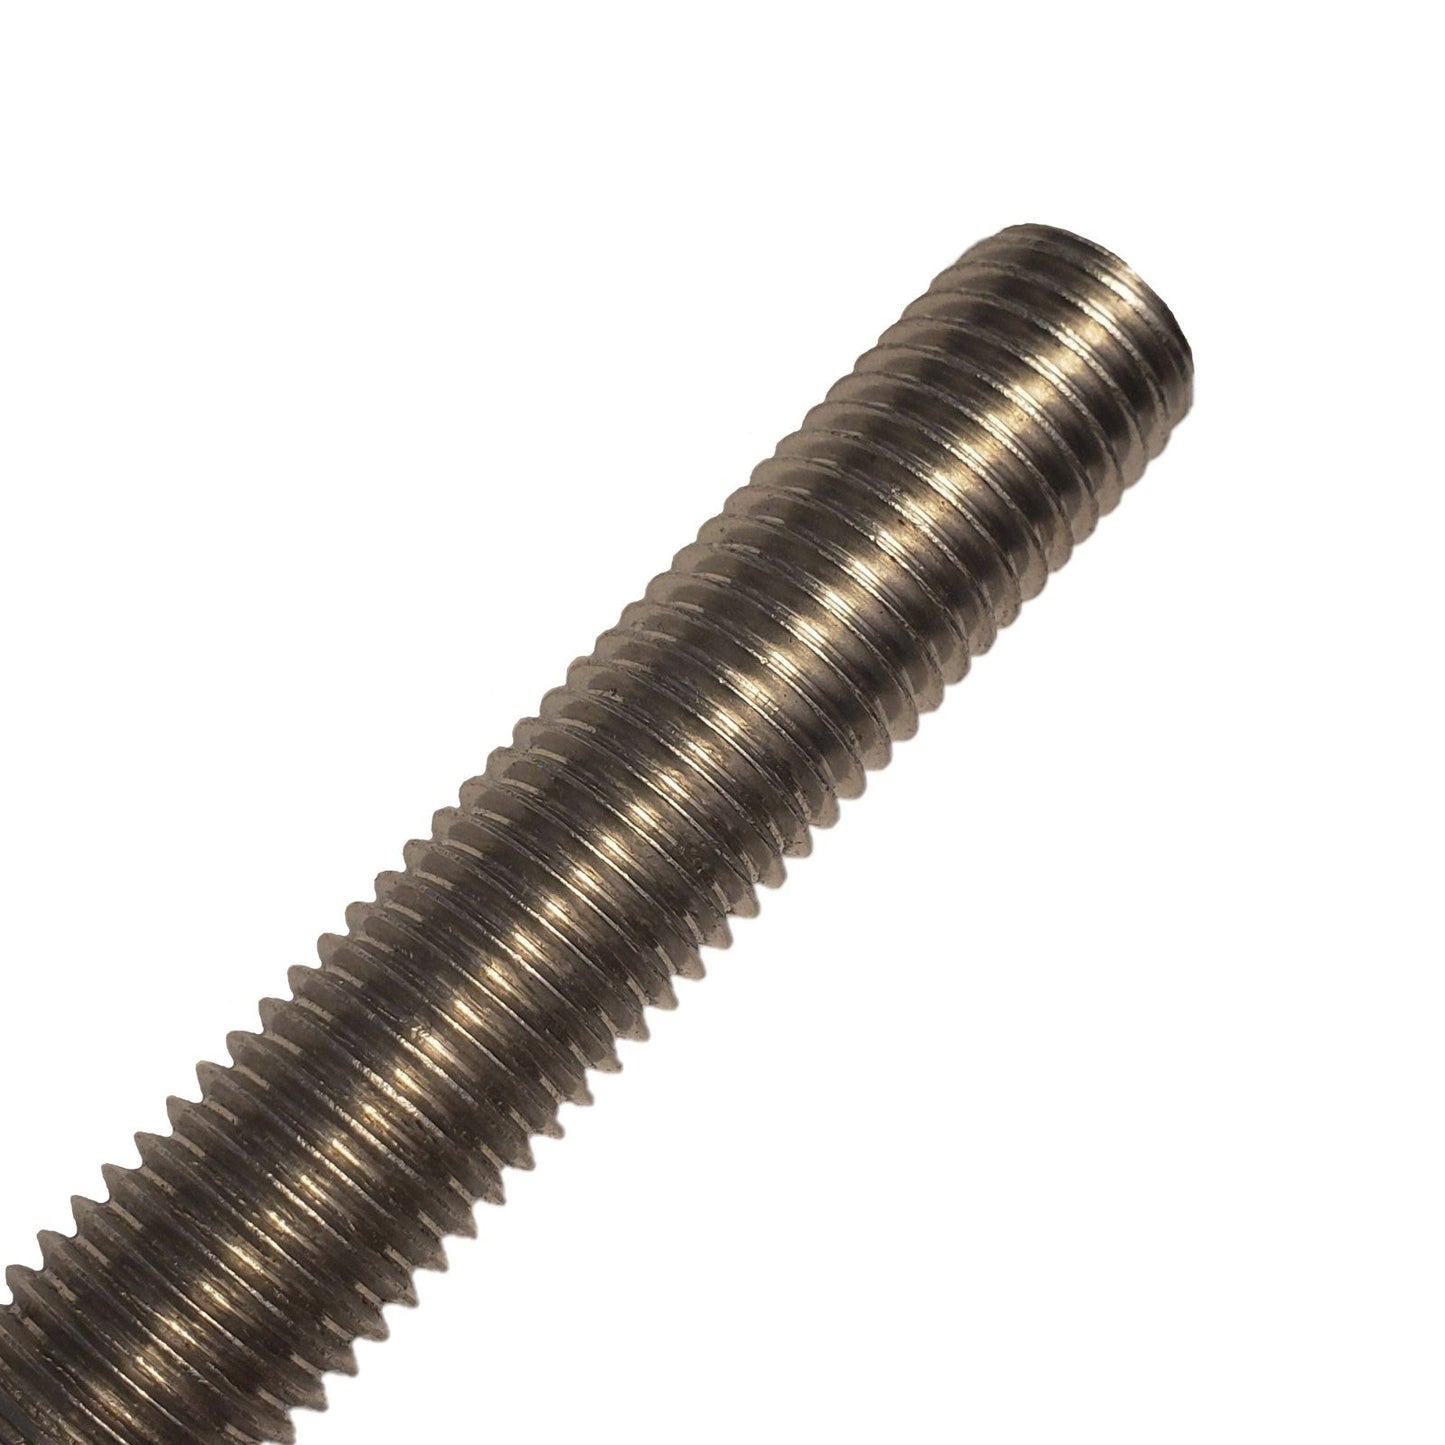 7/8"-9 x 3' 316 Stainless Threaded Rod - Made In USA